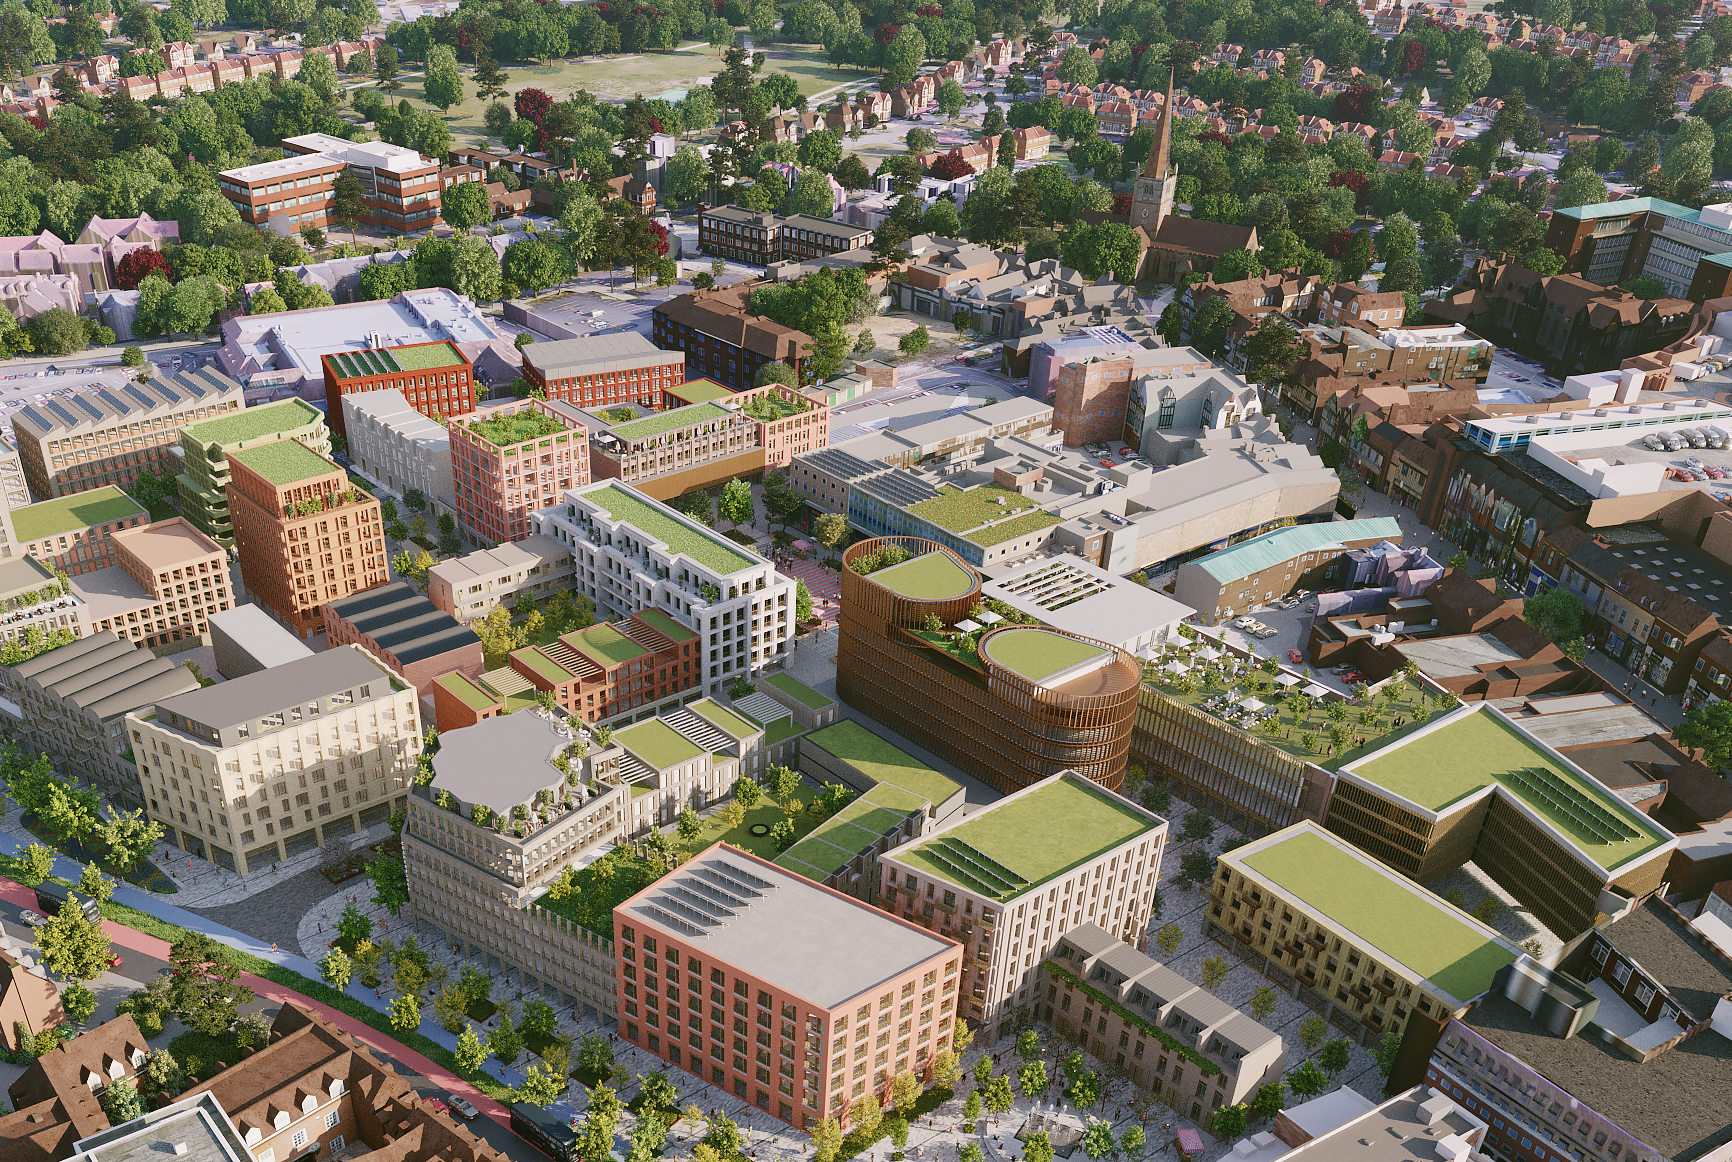 Illustrative concept design for a redeveloped Mell Square based on the Solihull Town Centre Masterplan